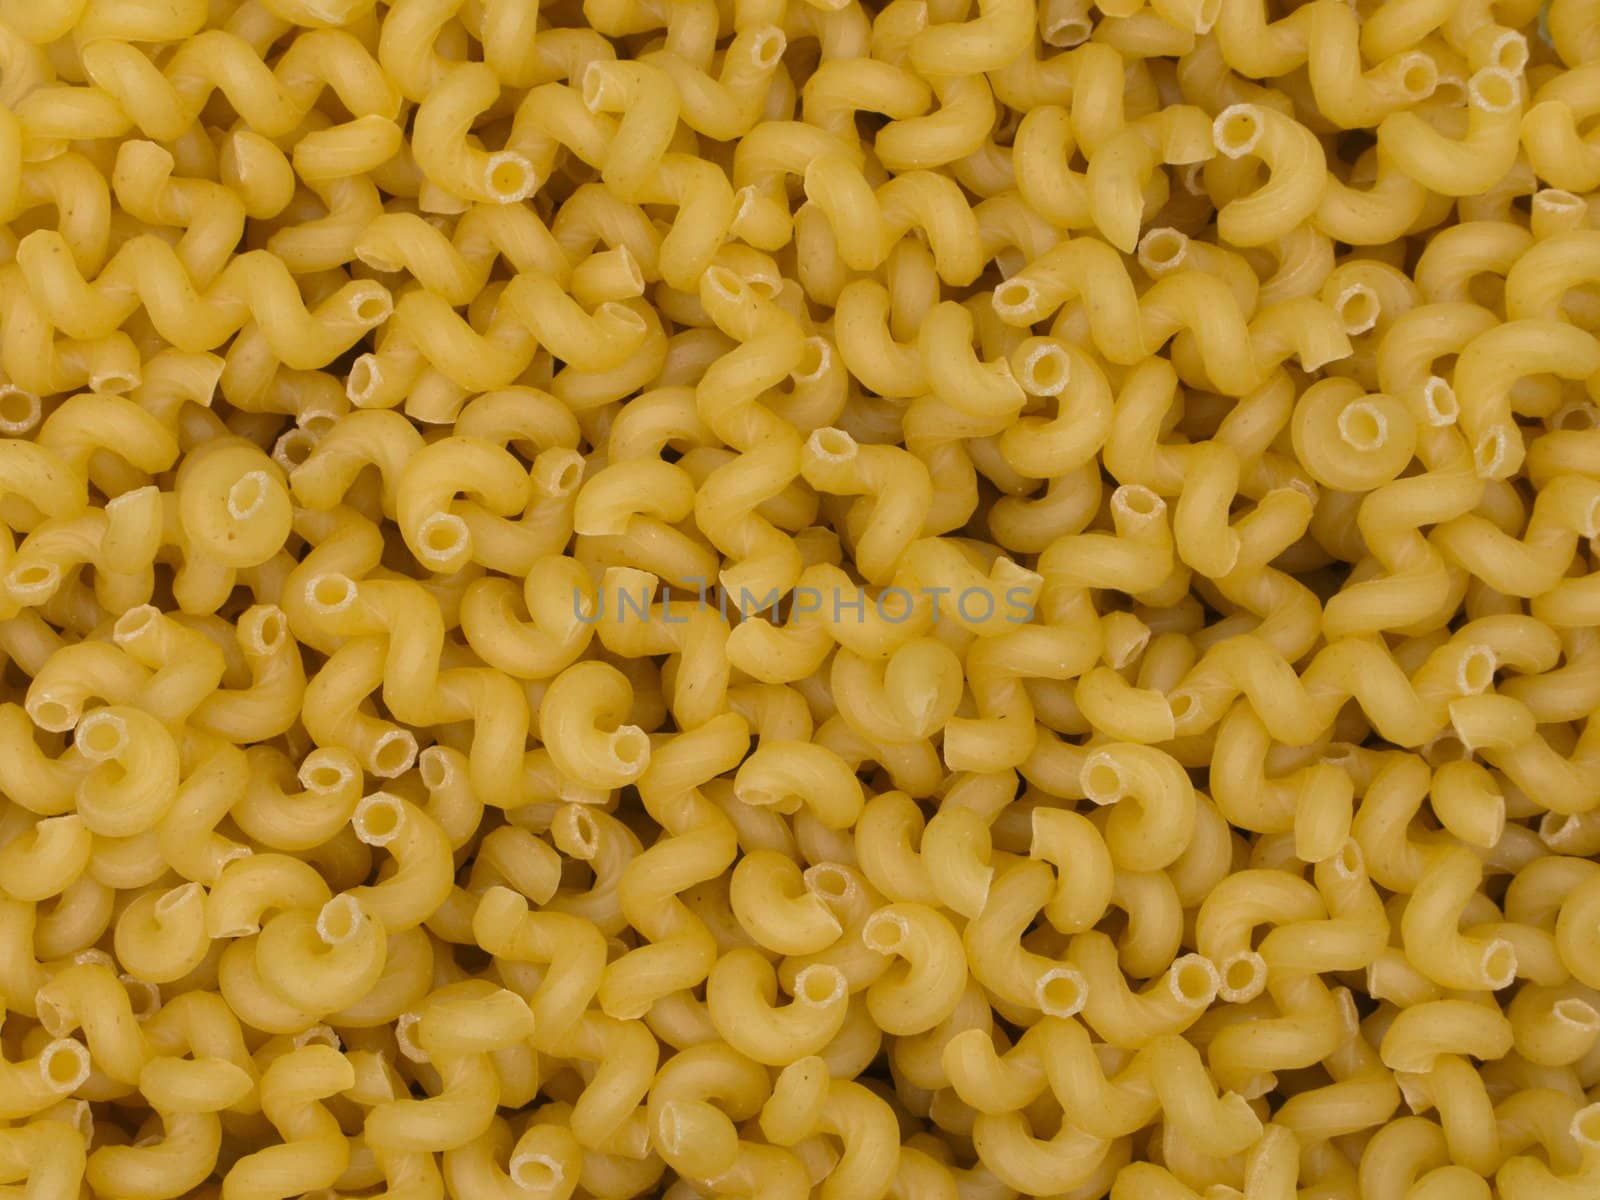 Macaroni food for pasta eating at dinner meal